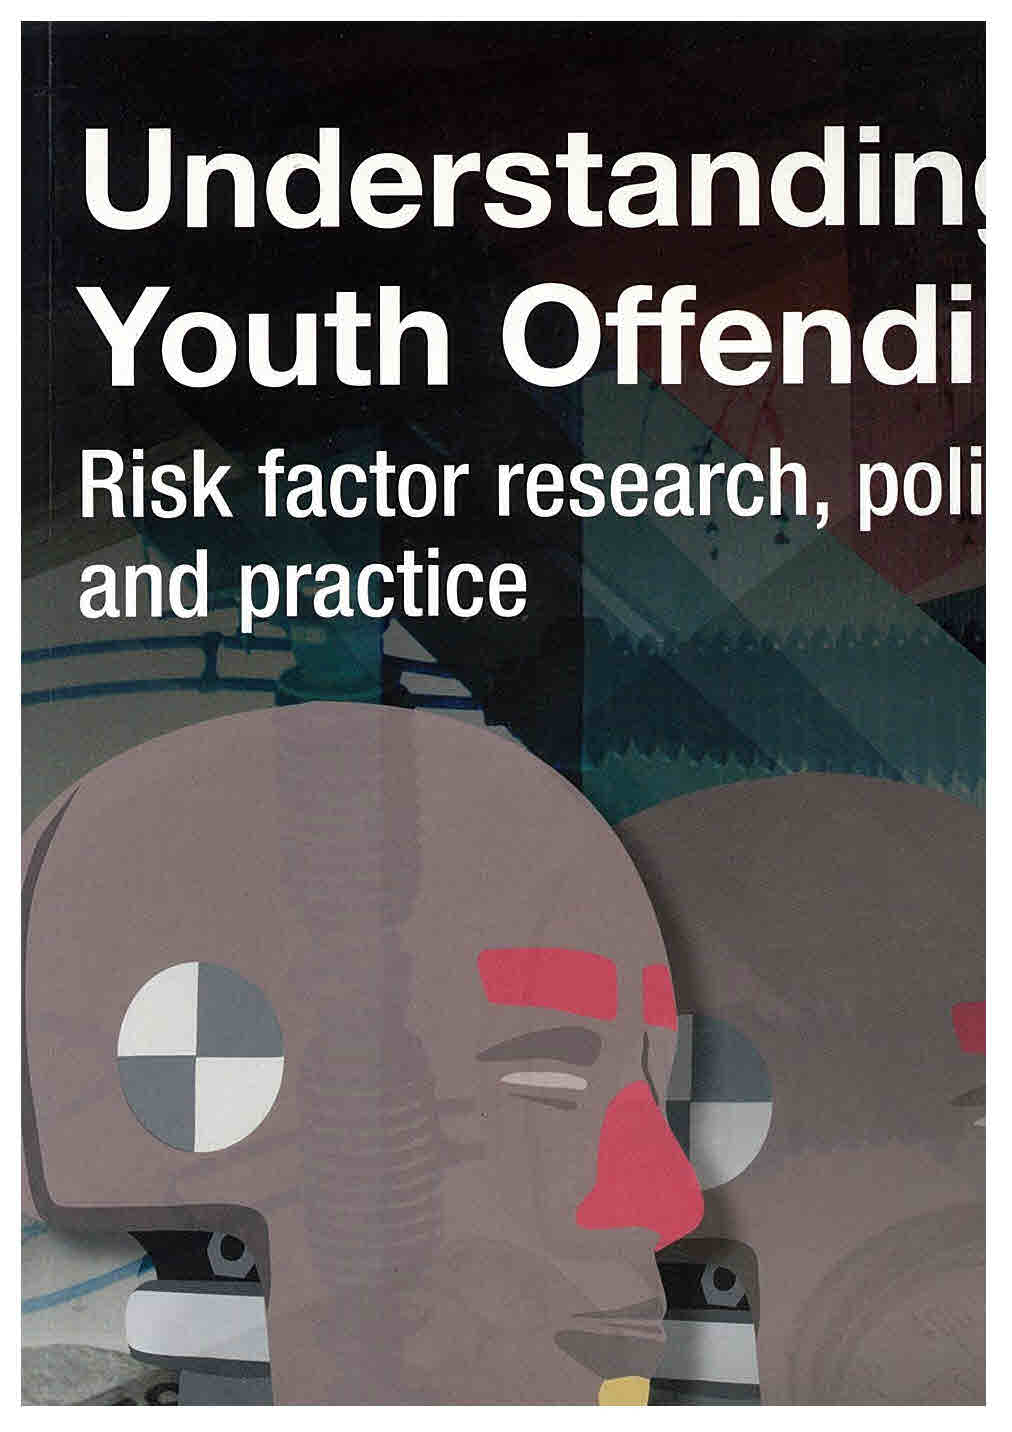 Understanding youth offending. Risk factor research, policy and practice